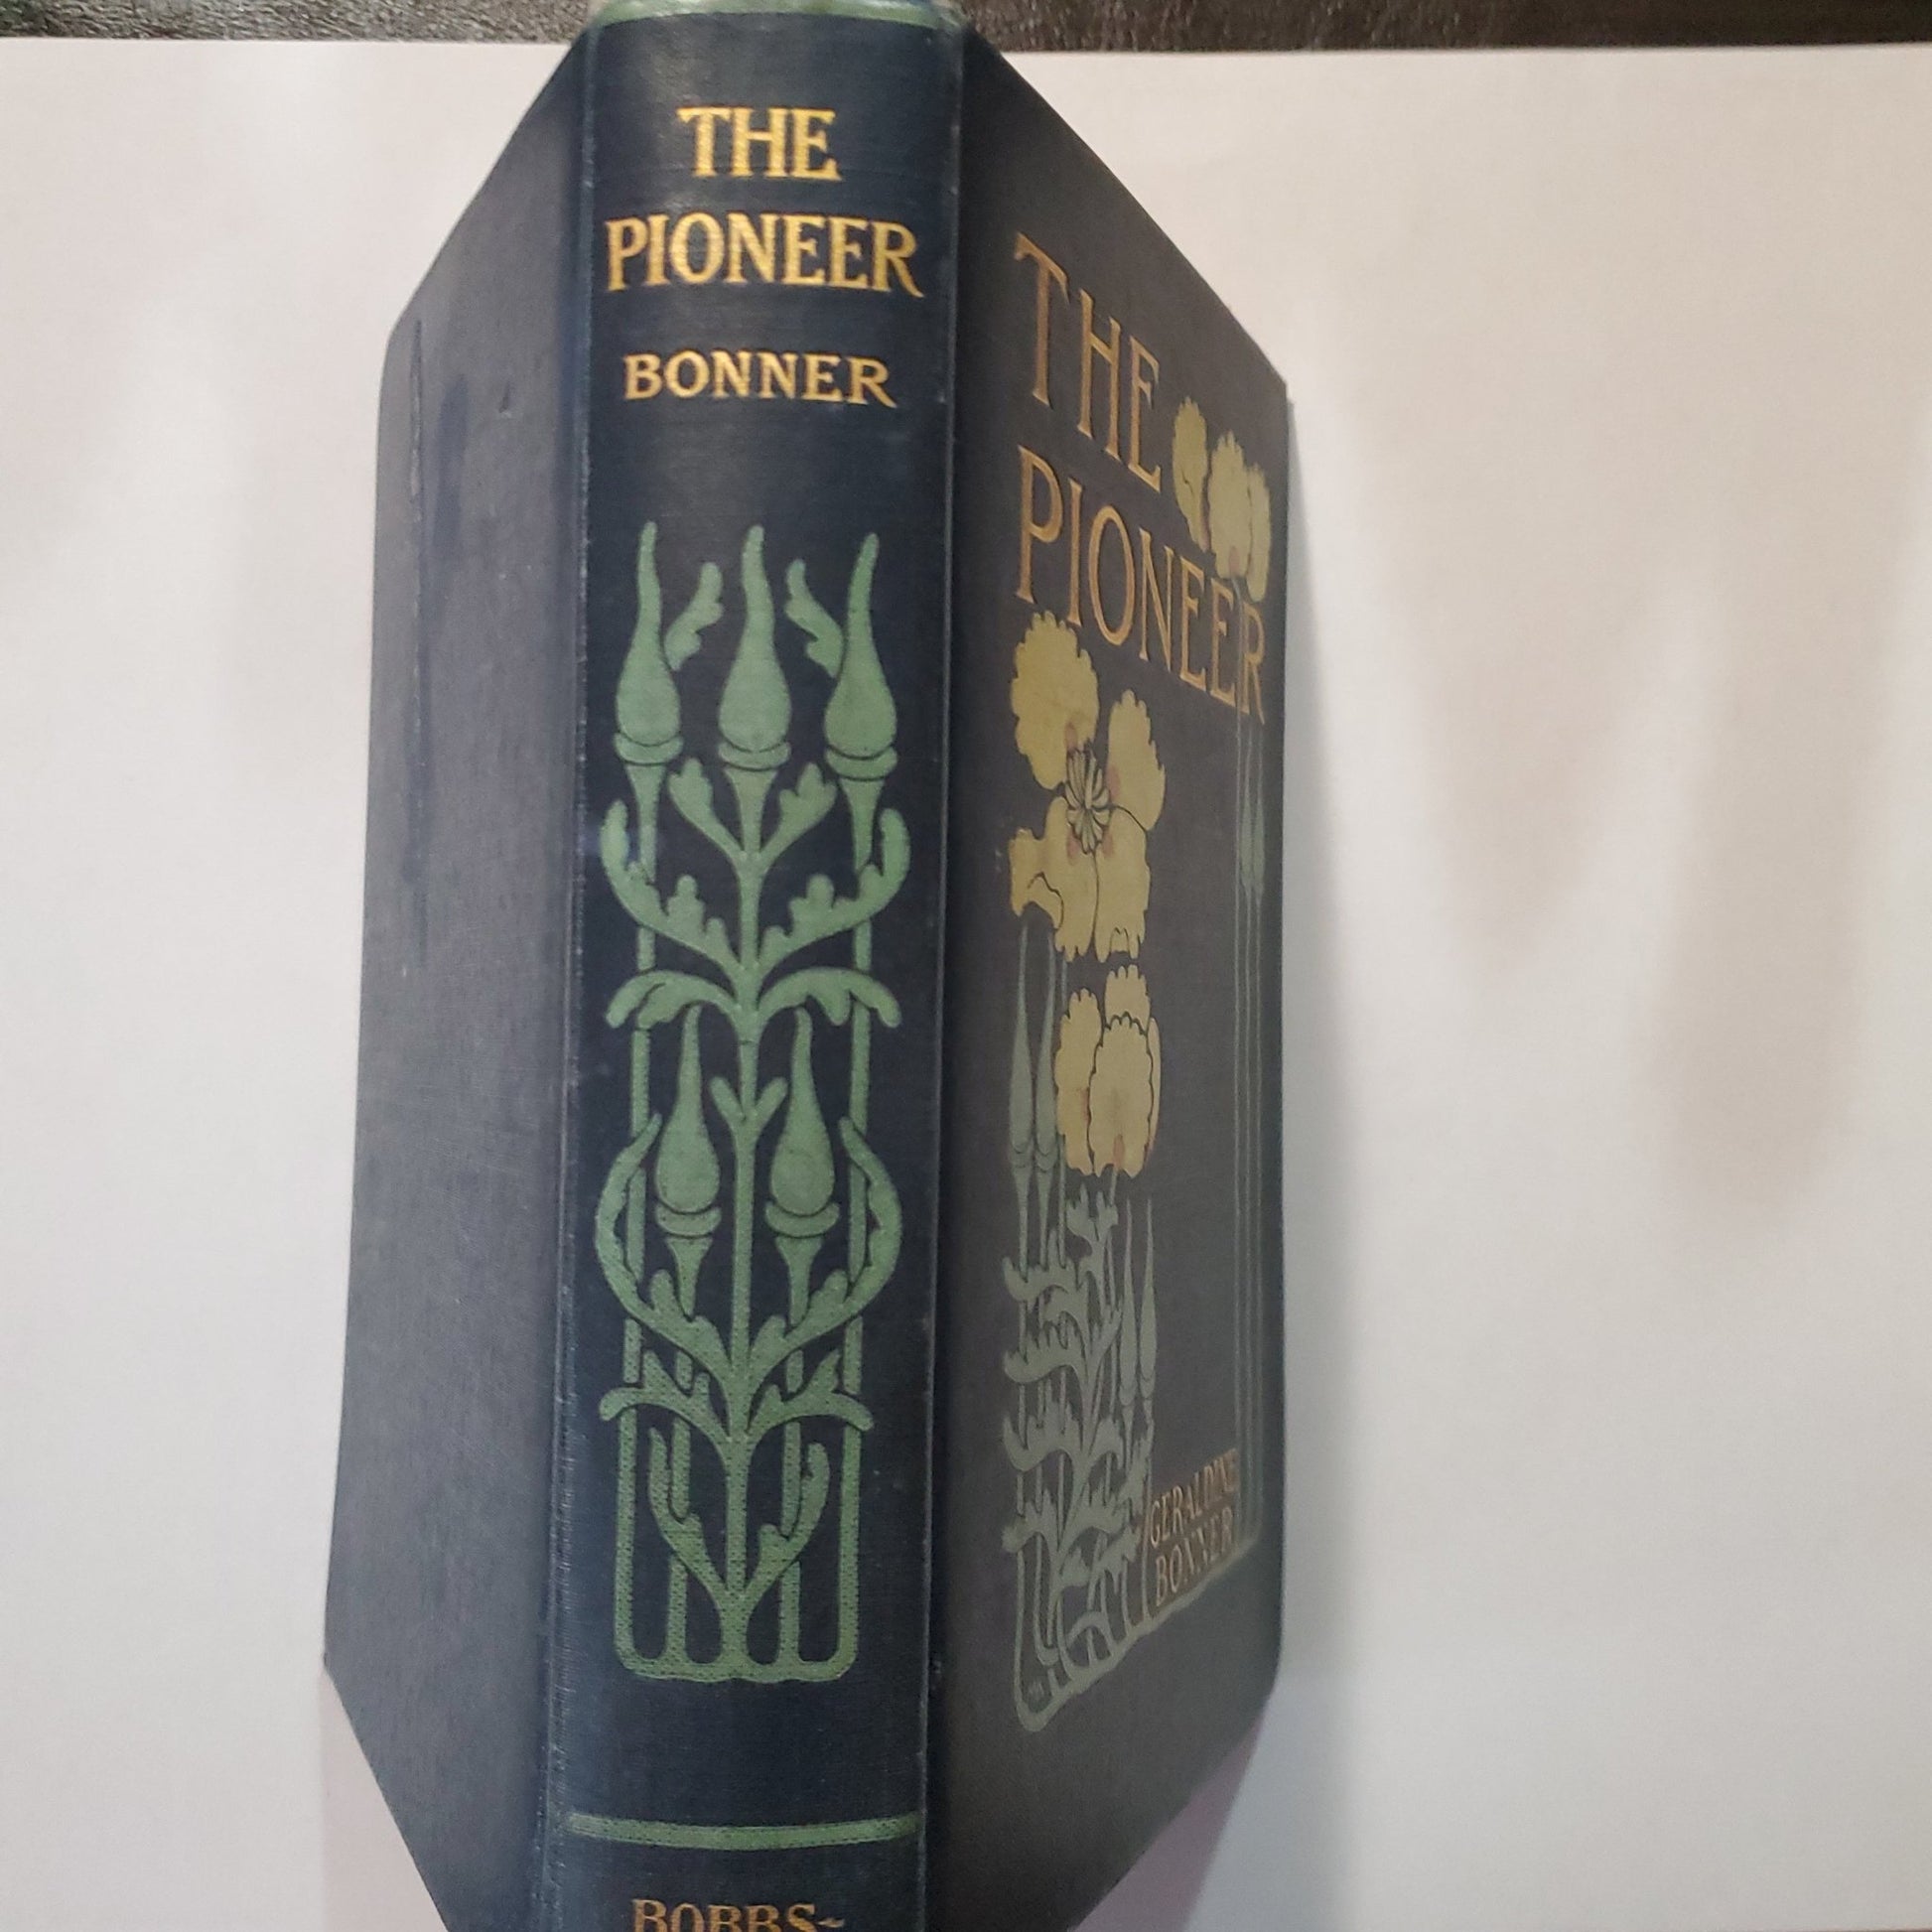 The Pioneer - [ash-ling] Booksellers